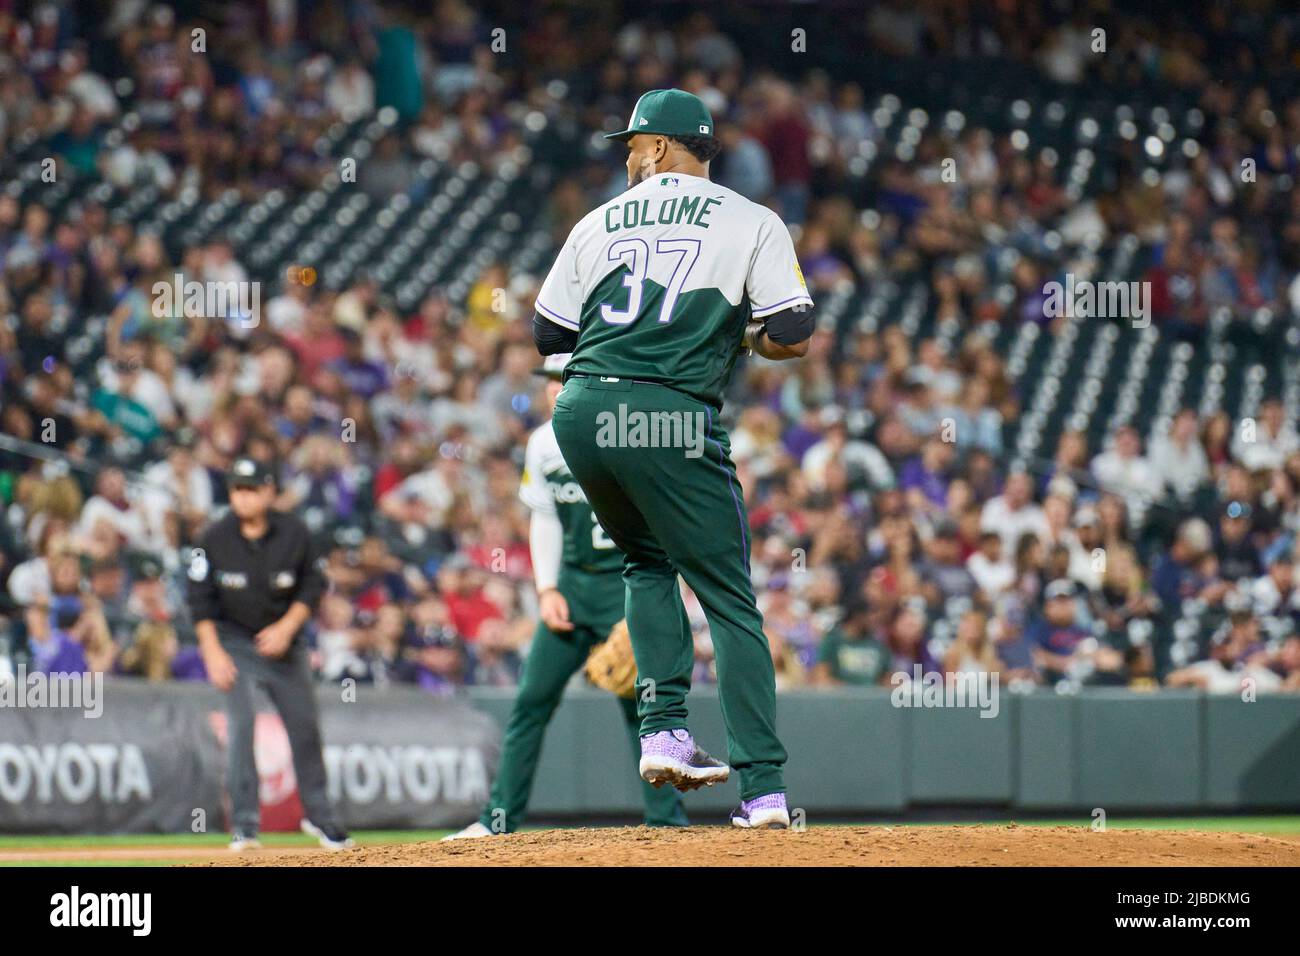 Denver CO, USA. 4th June, 2022. Colorado pitcher Alex Colome (37) throws a pitch during the game with Atlanta Braves and Colorado Rockies held at Coors Field in Denver Co. David Seelig/Cal Sport Medi. Credit: csm/Alamy Live News Stock Photo